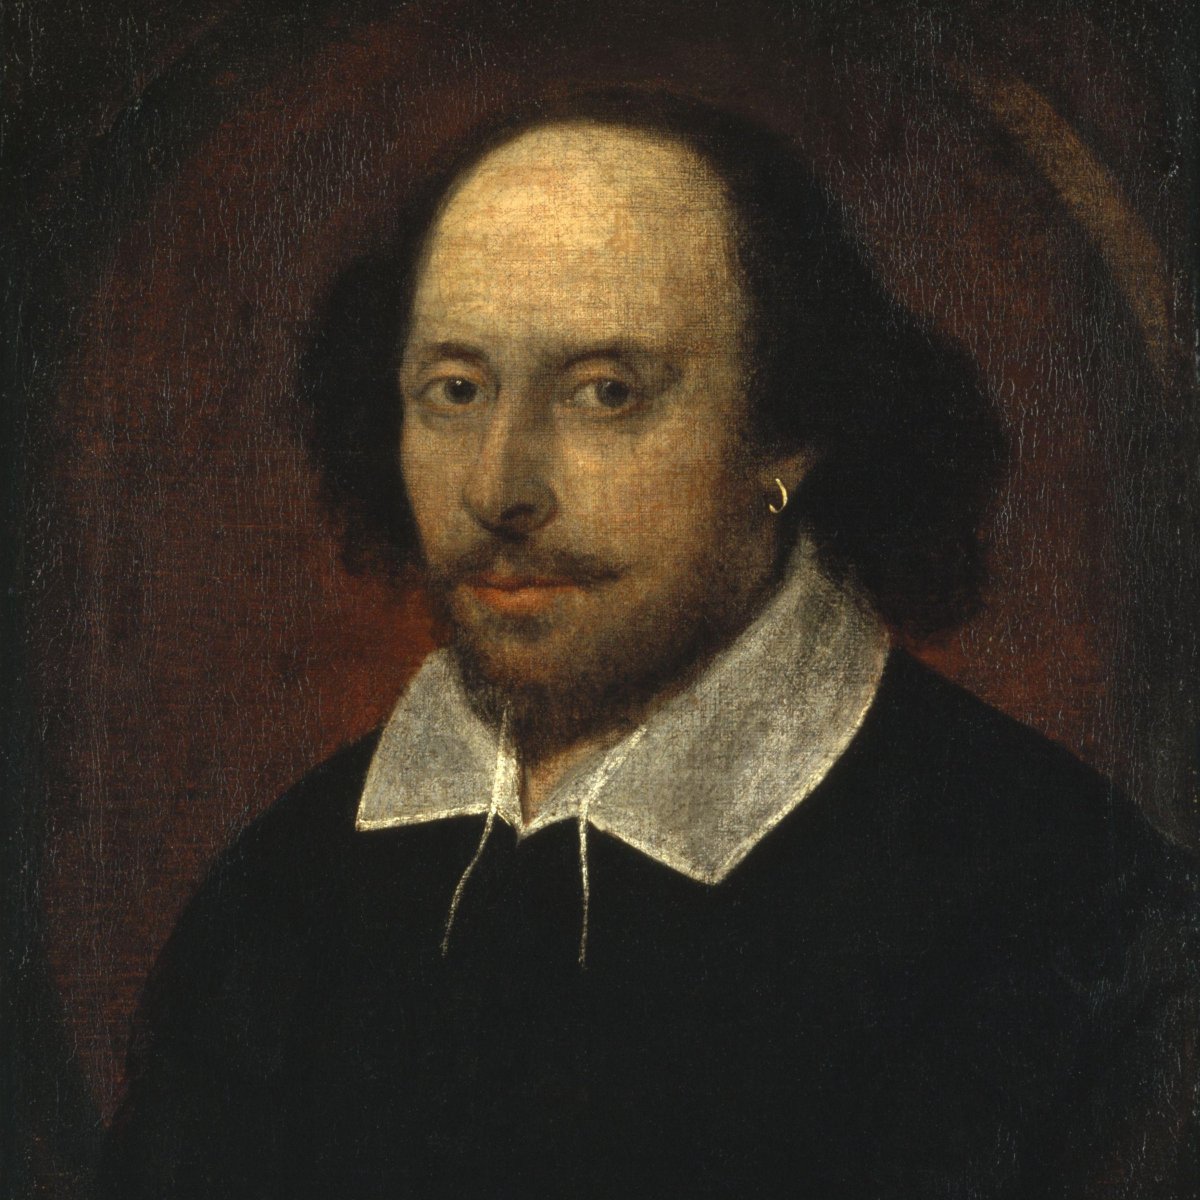 Happy 460th Birthday William Shakespeare! 🎉 Born in April 1564, Shakespeare grew to become one of the most influential writers in the English language. Which of his plays is your favourite? Let us know in the comments! 👇🎭